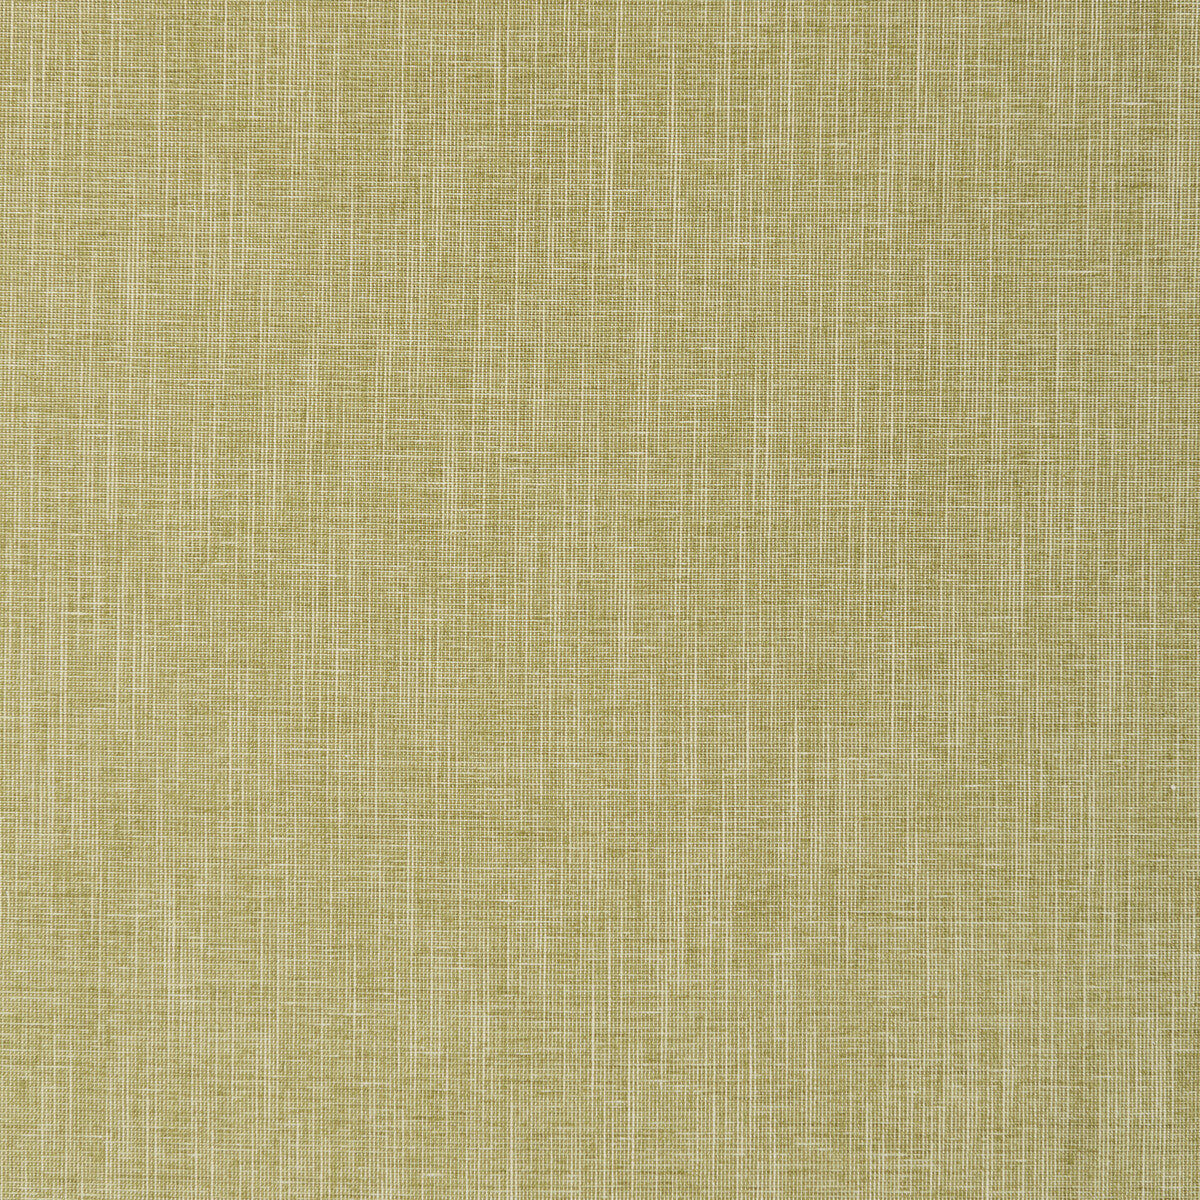 Kravet Smart fabric in 37078-23 color - pattern 37078.23.0 - by Kravet Smart in the Trio Textures collection